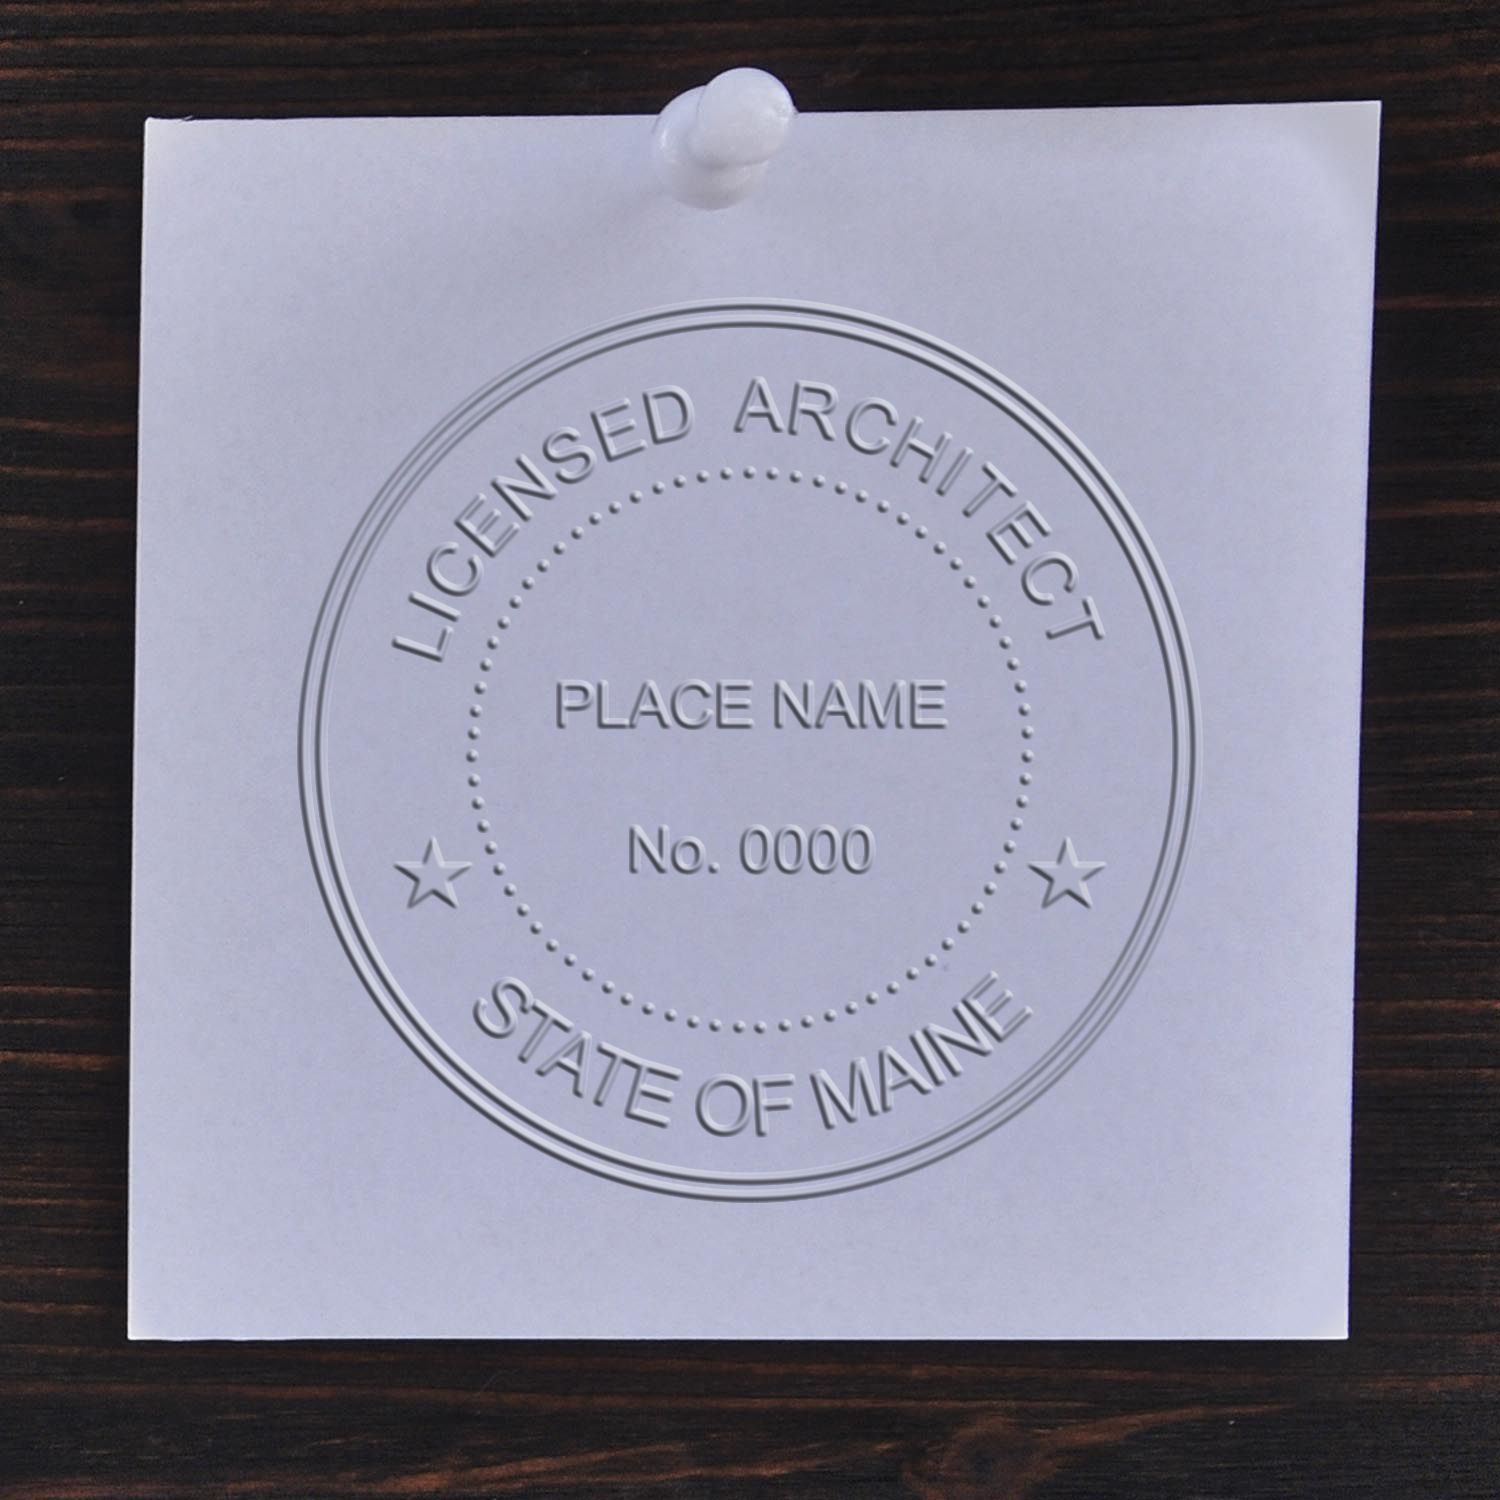 An in use photo of the Hybrid Maine Architect Seal showing a sample imprint on a cardstock